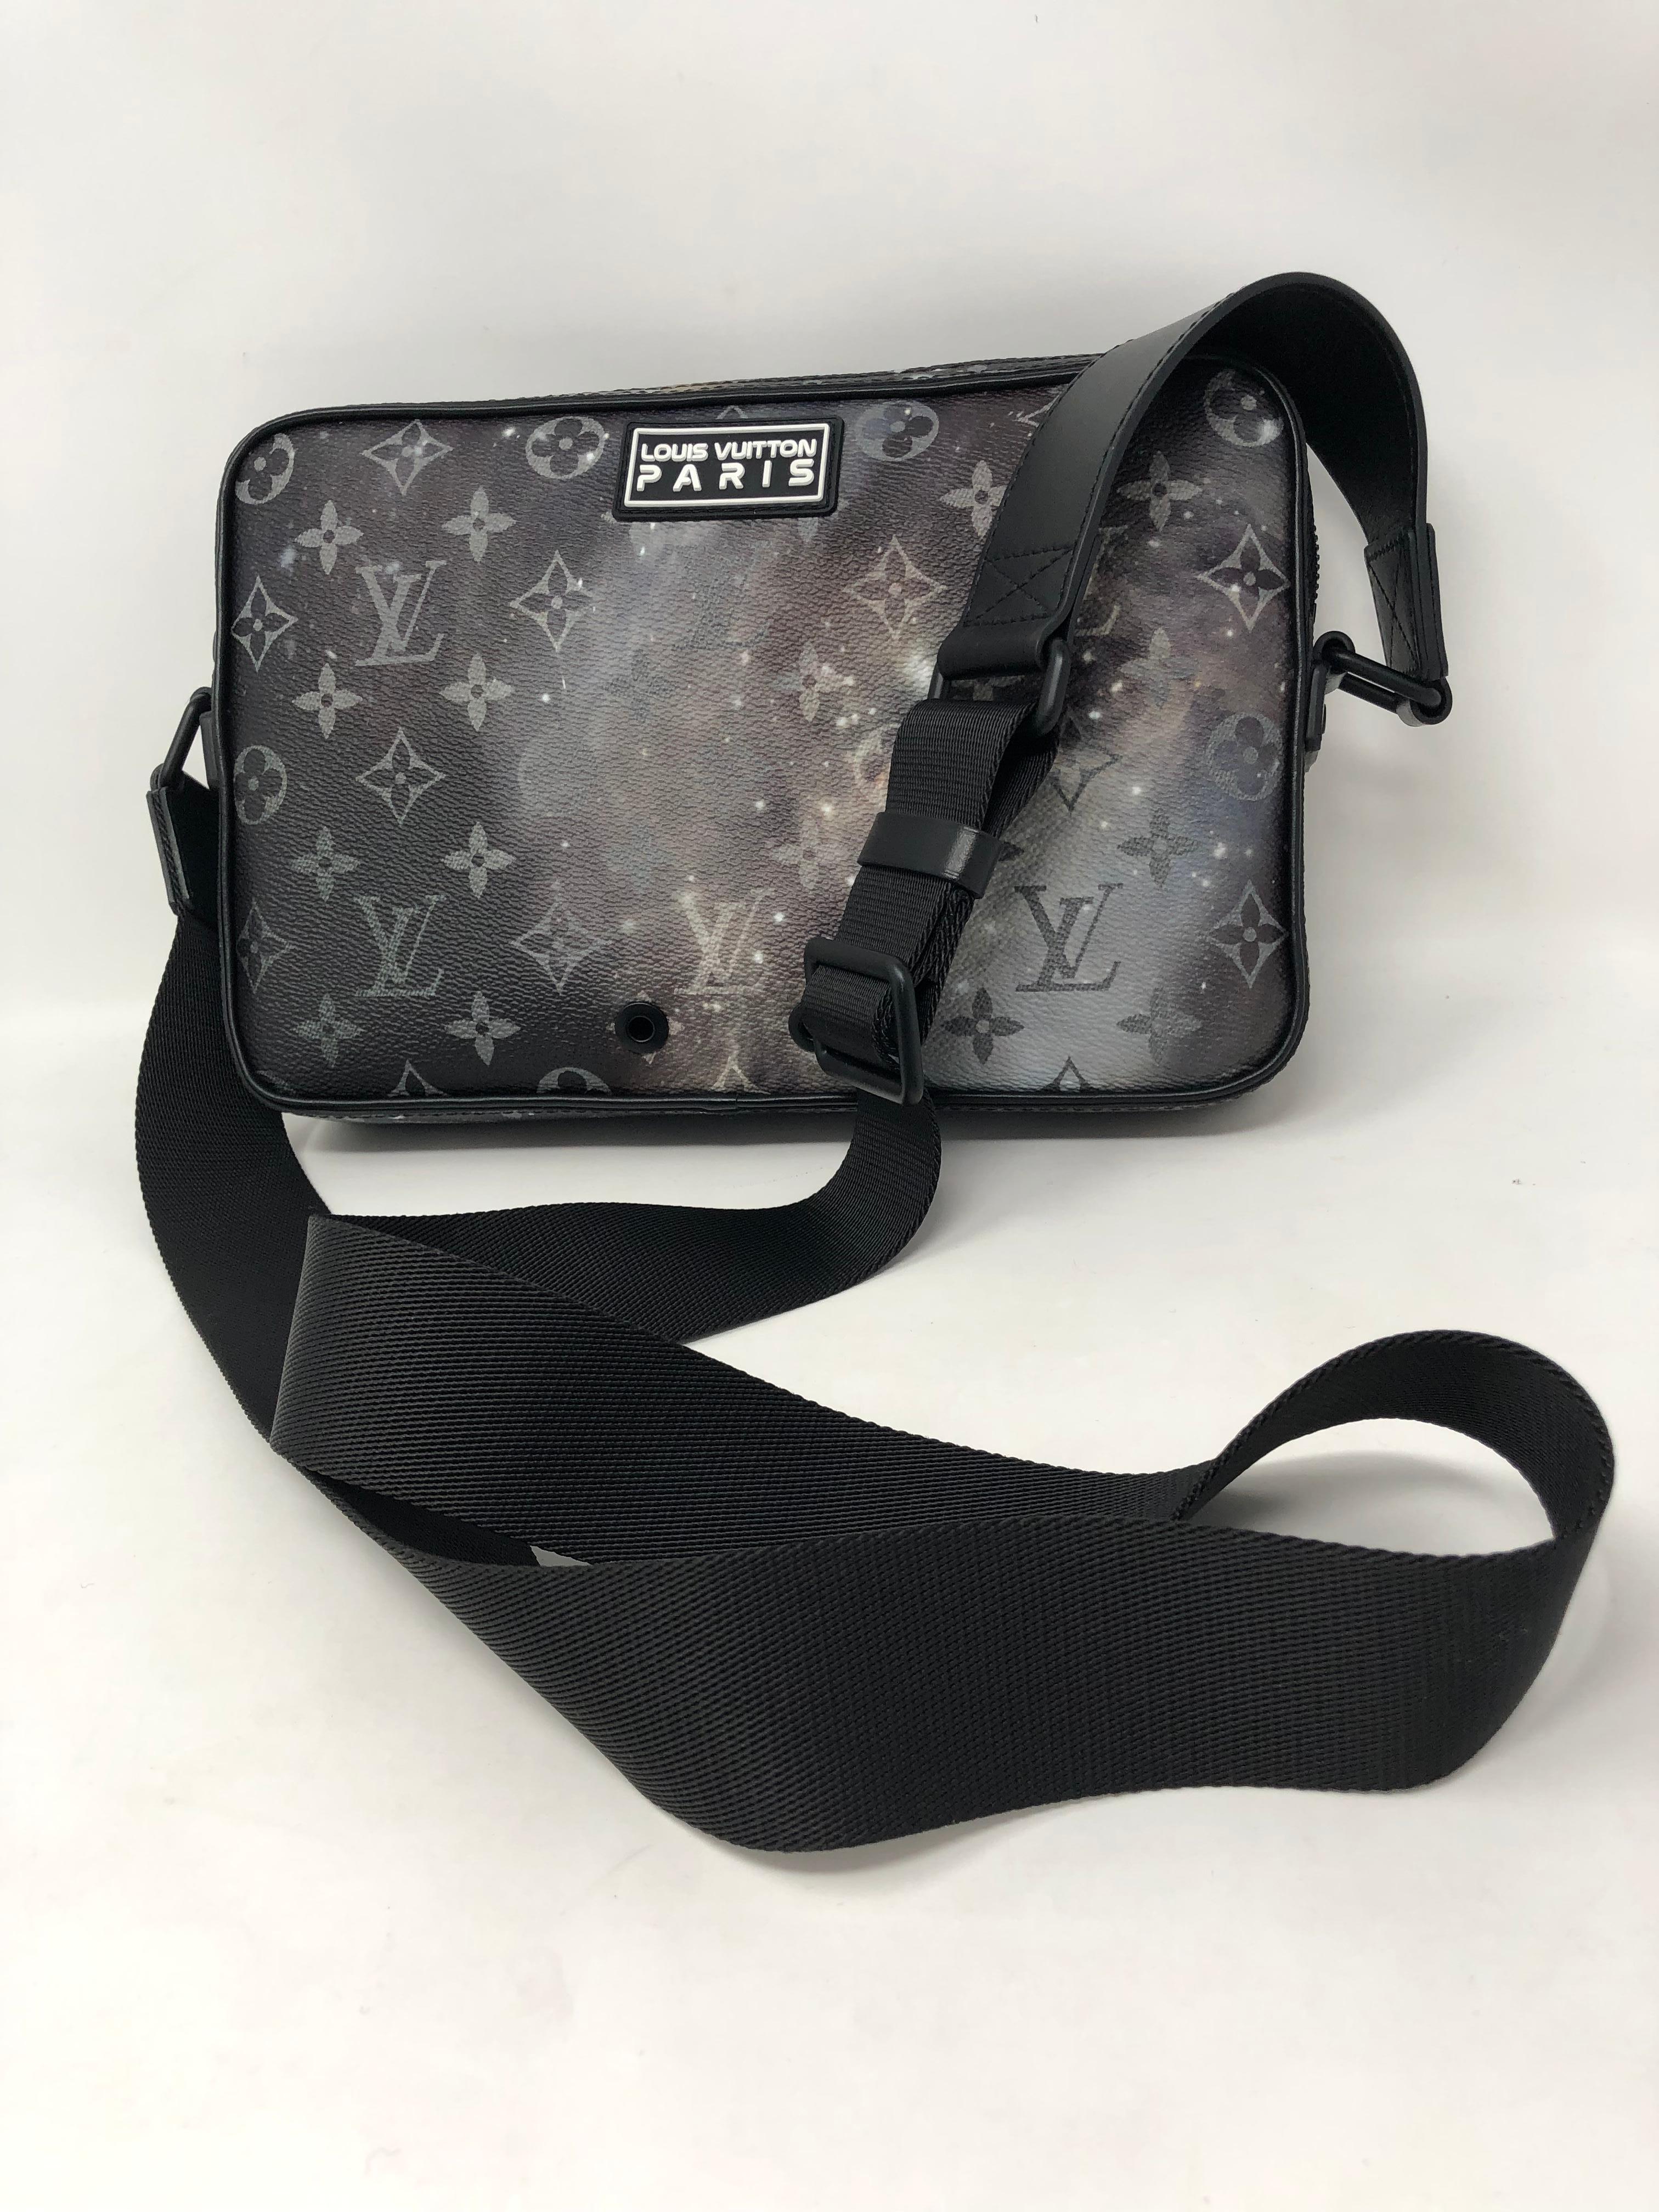 Louis Vuitton Alpha Monogram Messenger Bag in Galaxy Black. Rare and limited part of the LV Spring/ Summer 2019 collection. One to keep for your collection. The strap is adjustable so can be worn crossbody or shorter. Never used. Brand new in box.